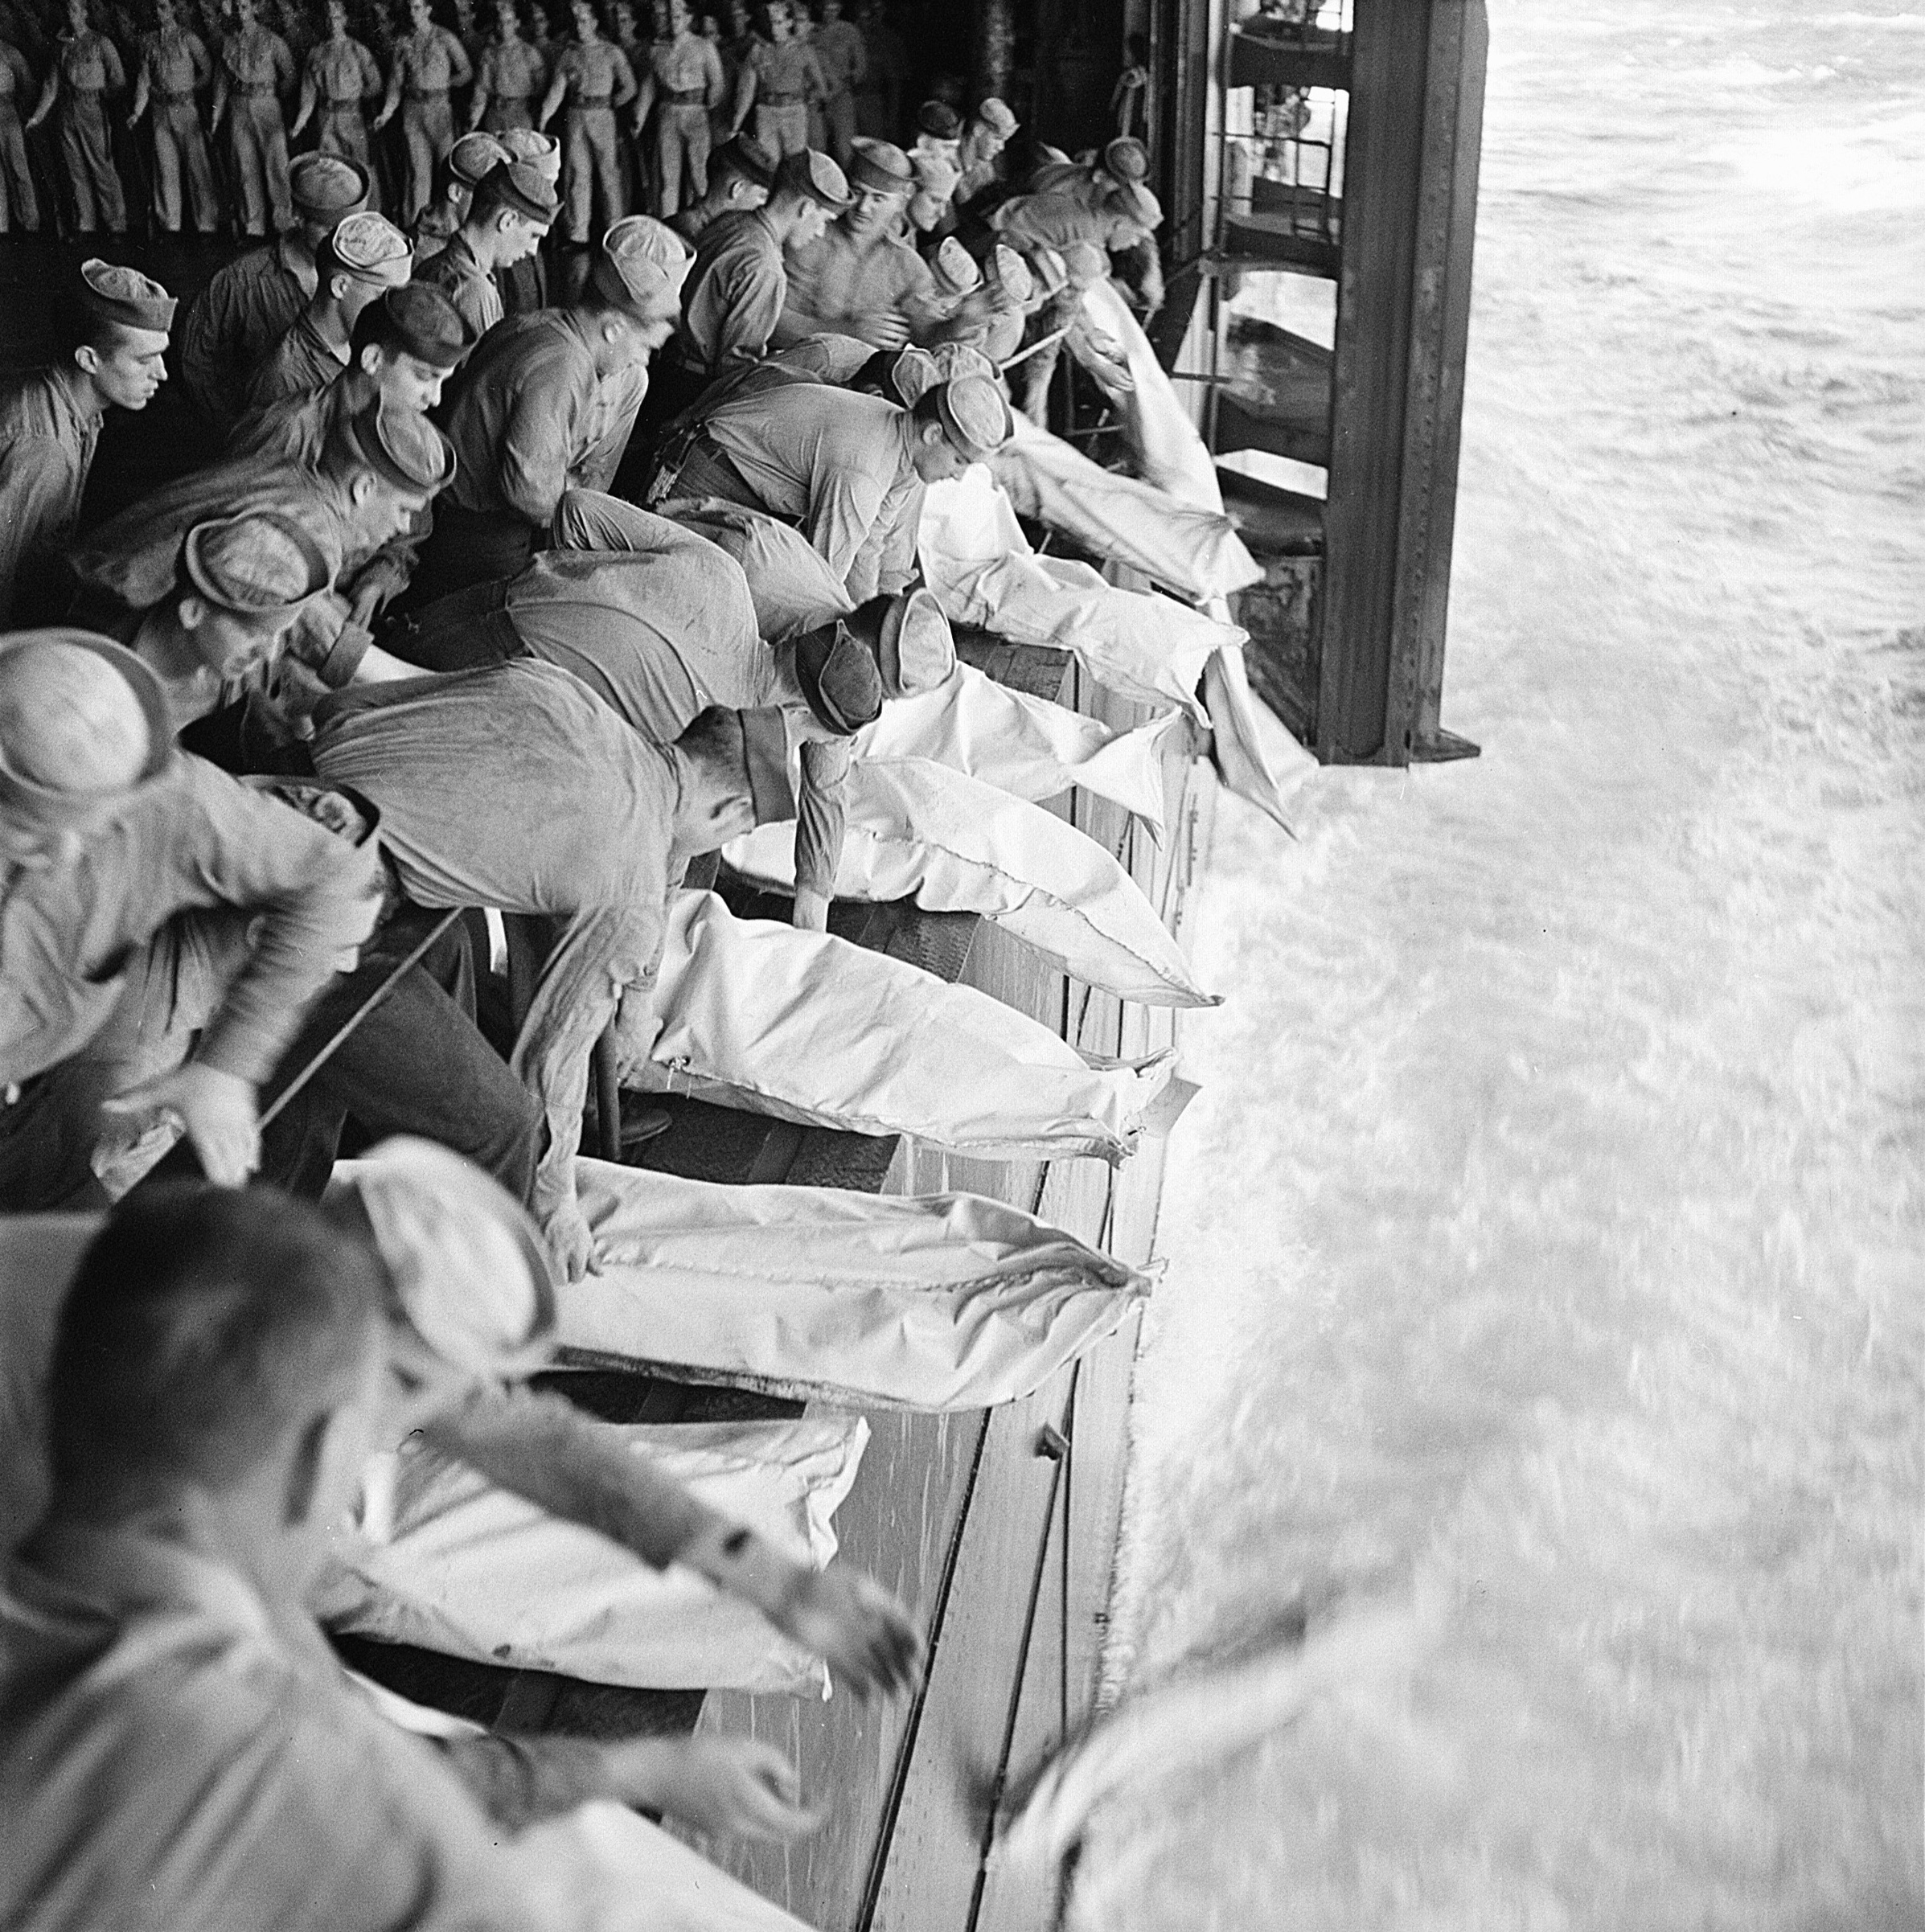 A burial party assembled on Intrepid's hangar deck in the Philippine Sea the day following the special attack of 25 Nov 1944, photo 5 of 5